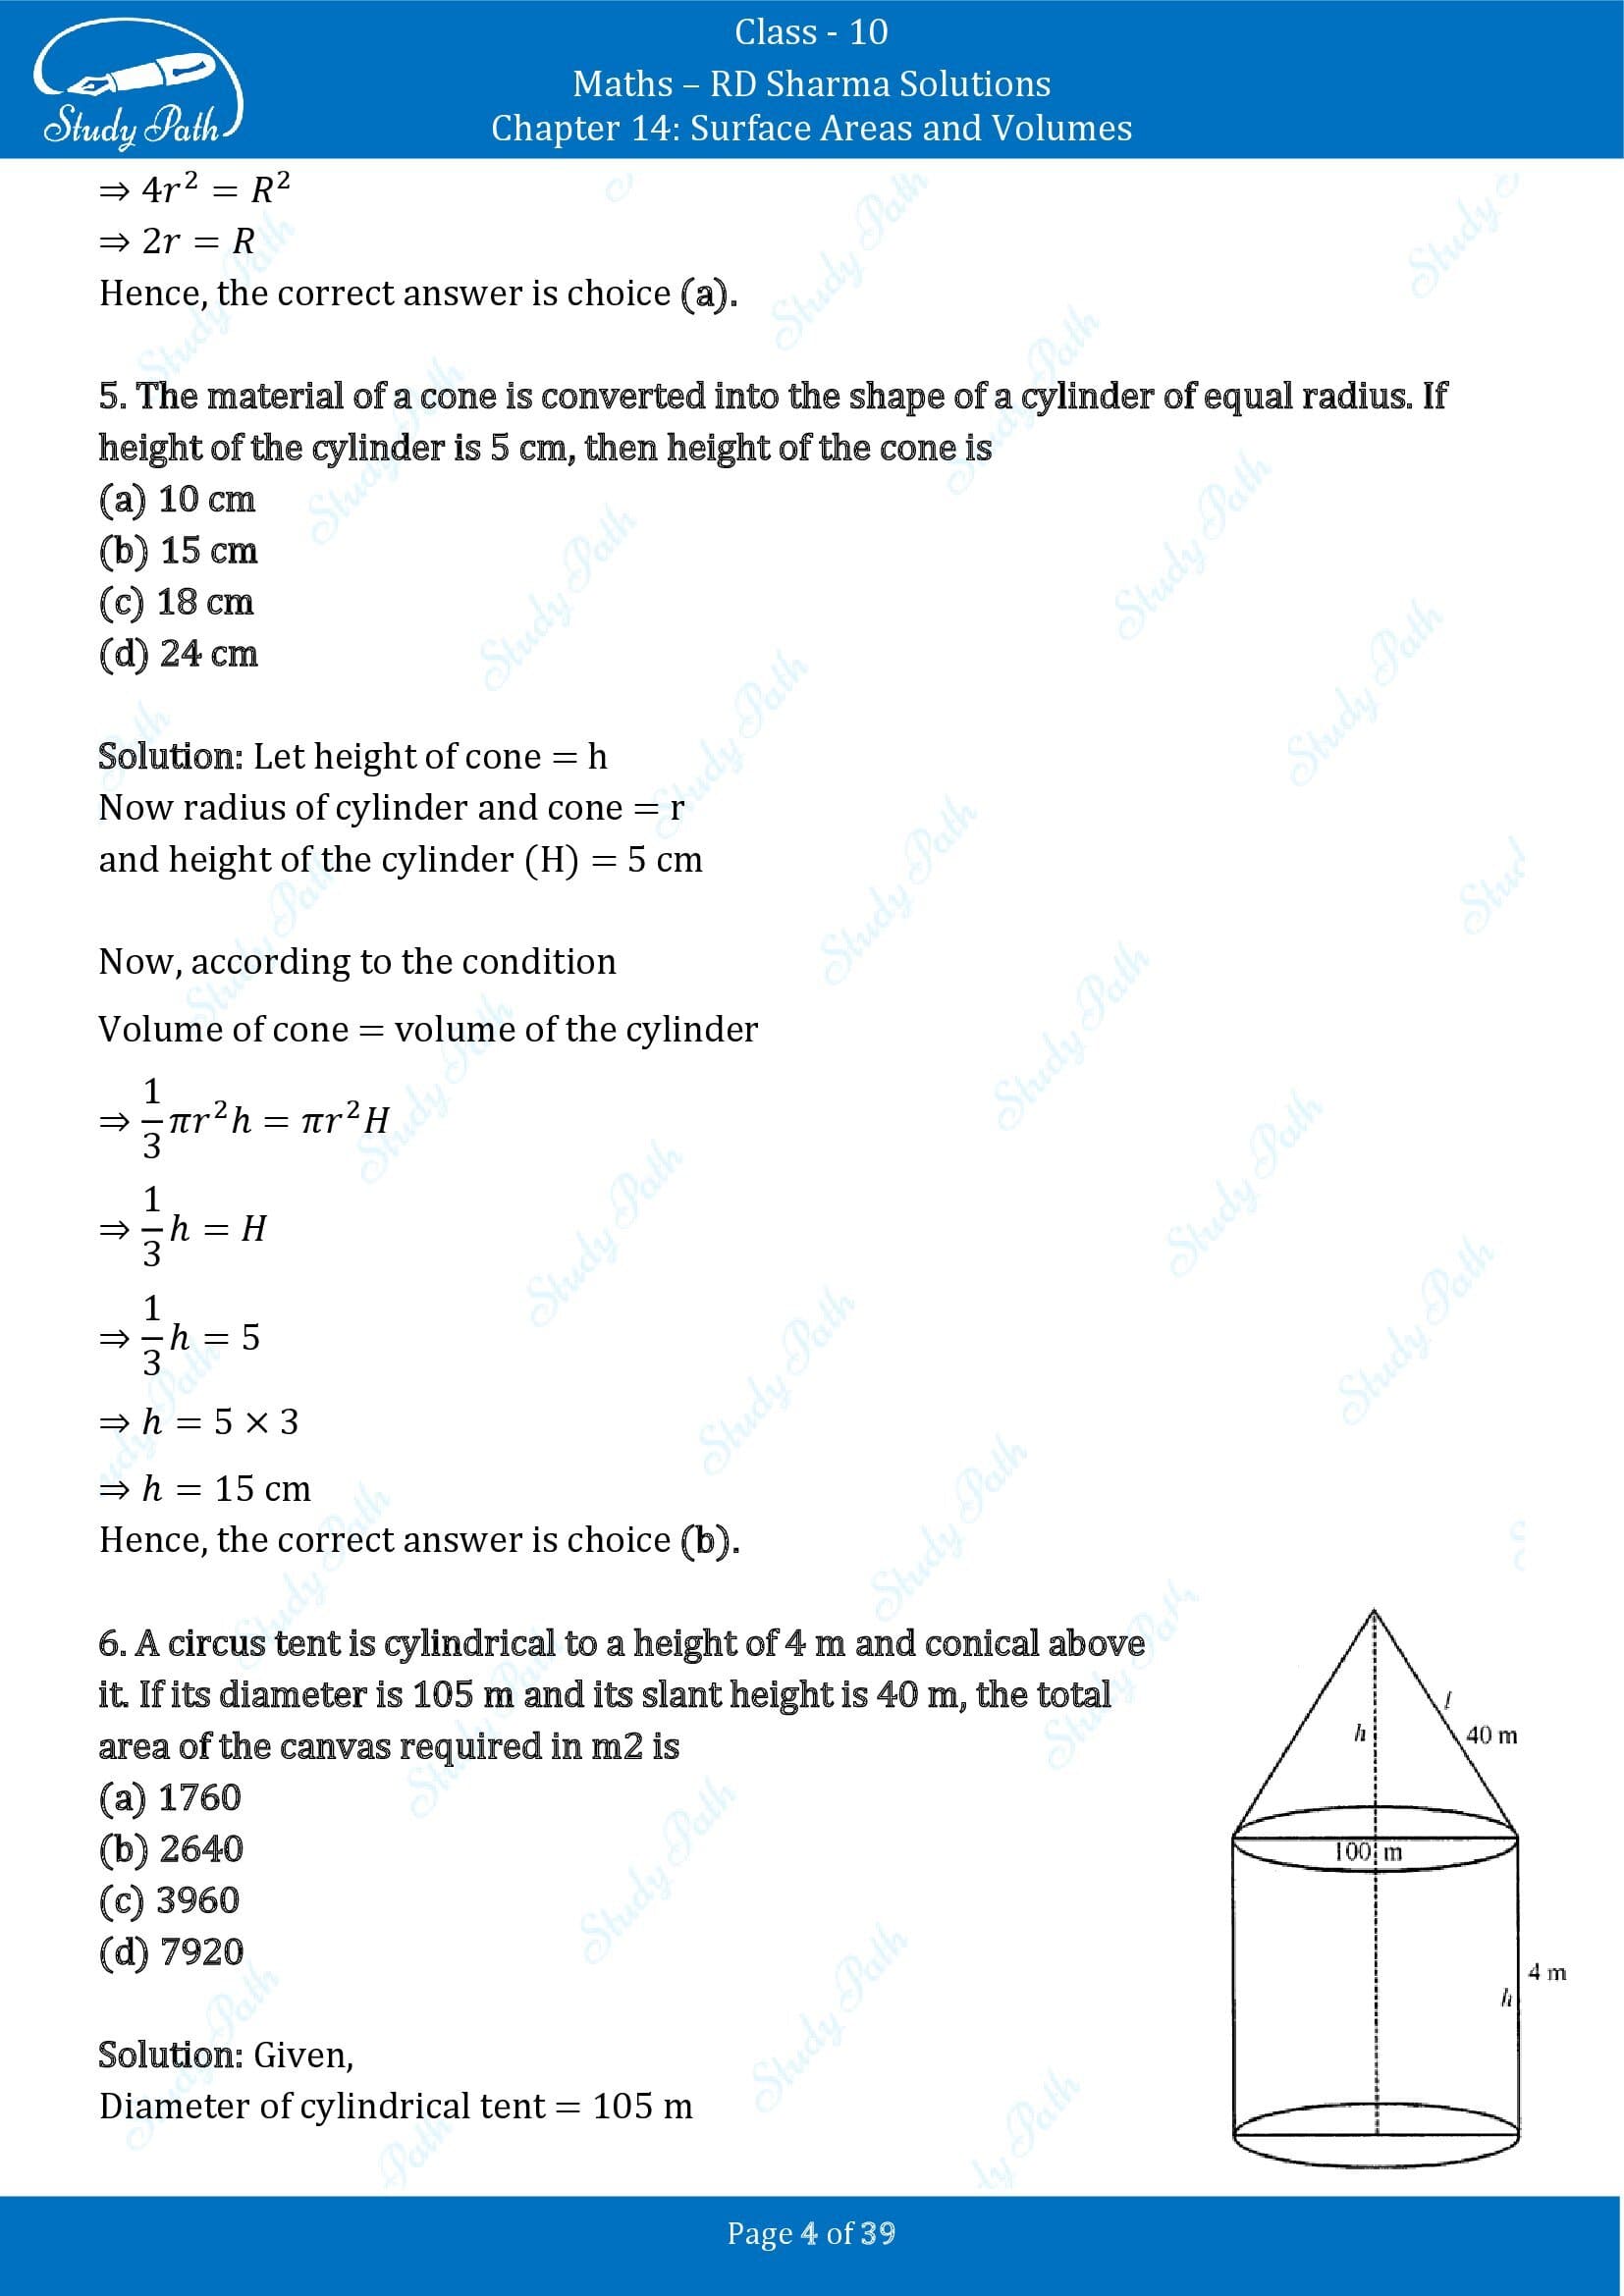 RD Sharma Solutions Class 10 Chapter 14 Surface Areas and Volumes Multiple Choice Question MCQs 00004